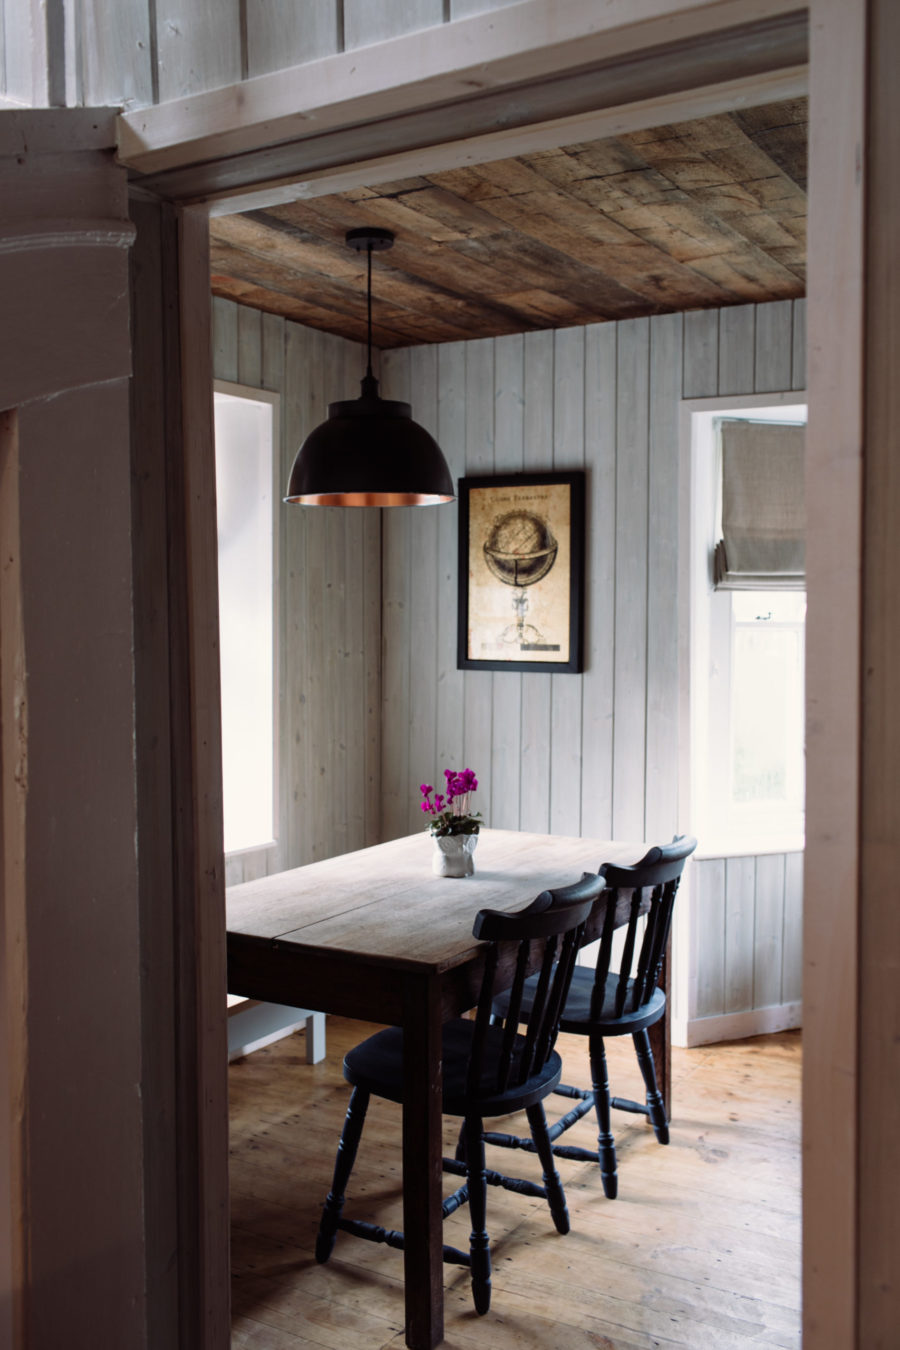 English cottage. Rustic dinning room. If you're on the hunt for sustainable, dog-friendly hotels, travel to these destinations with four-legged friends in tow.